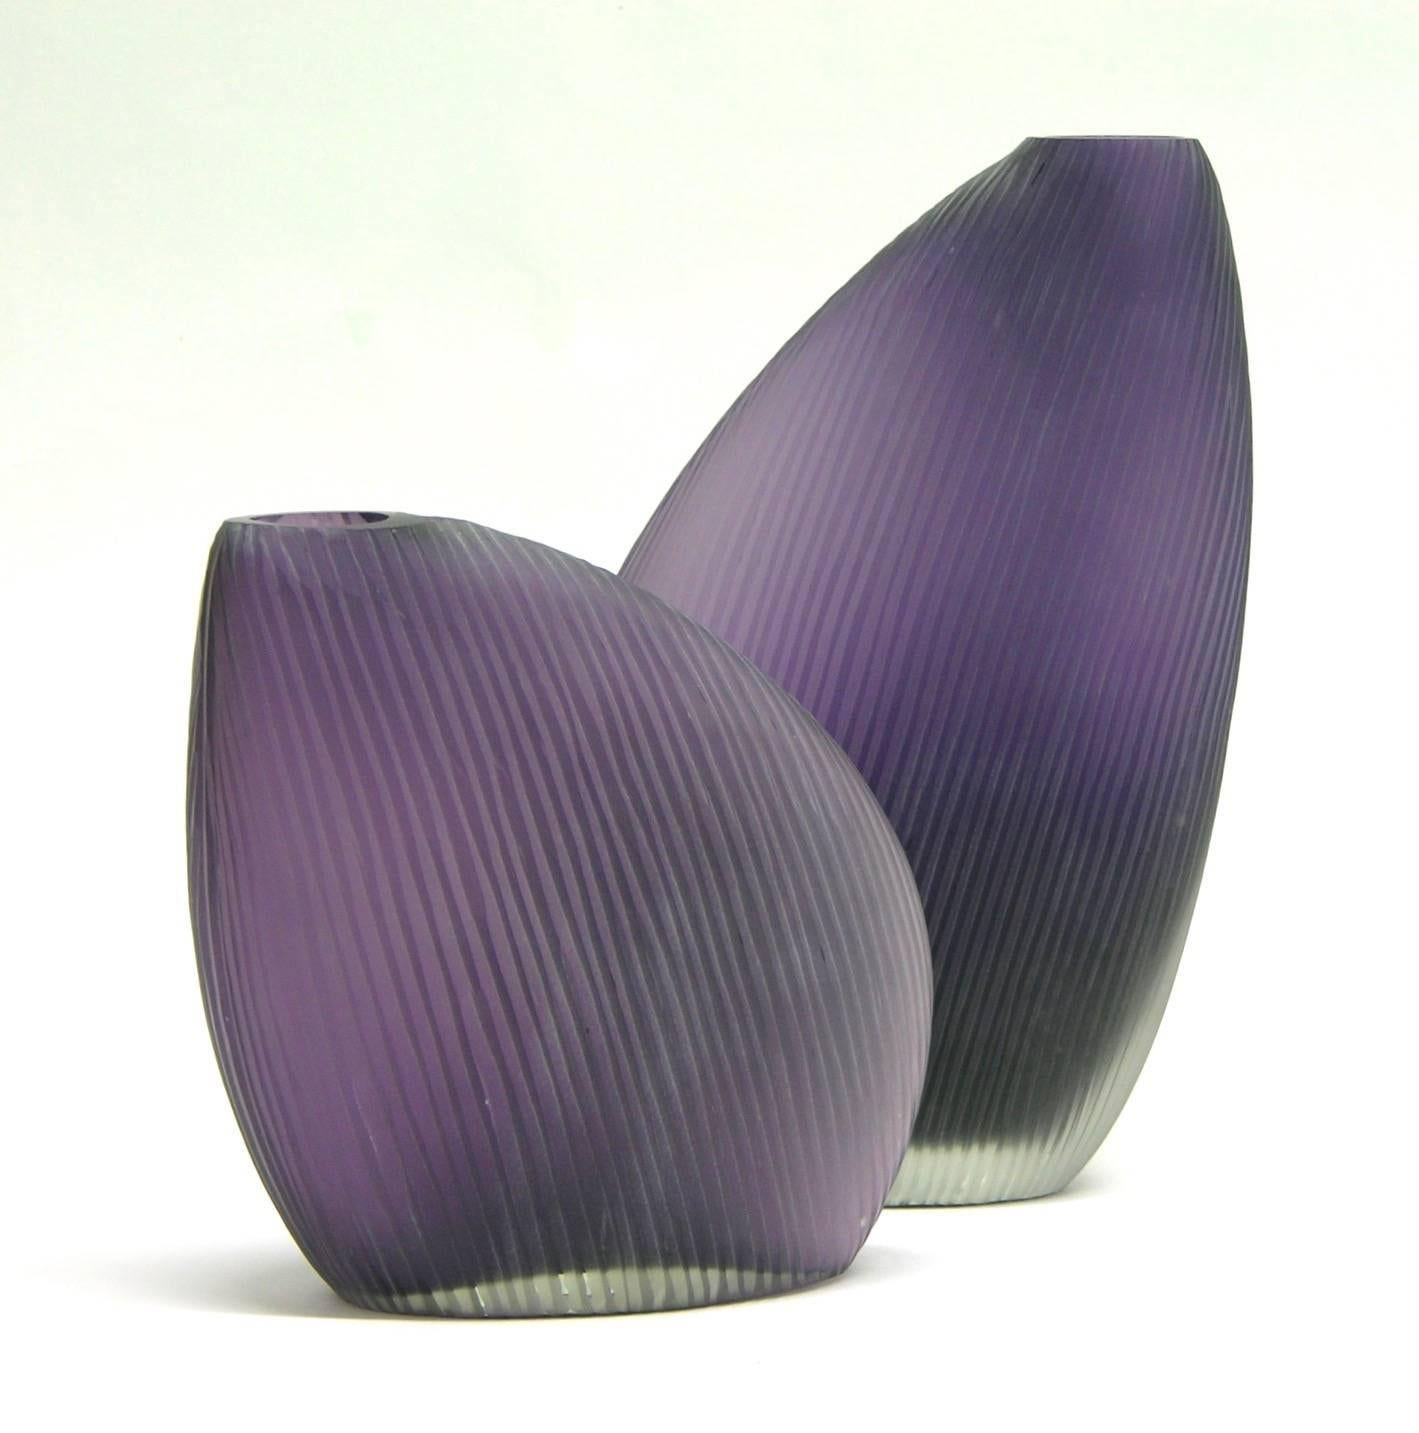 Very elegant vintage vases in different heights by Vistosi, of modern design and sleek interesting shape in a subtle purple Murano glass overlaid in clear, the body is hand ground with vertical lines resulting in a raised organic texture and